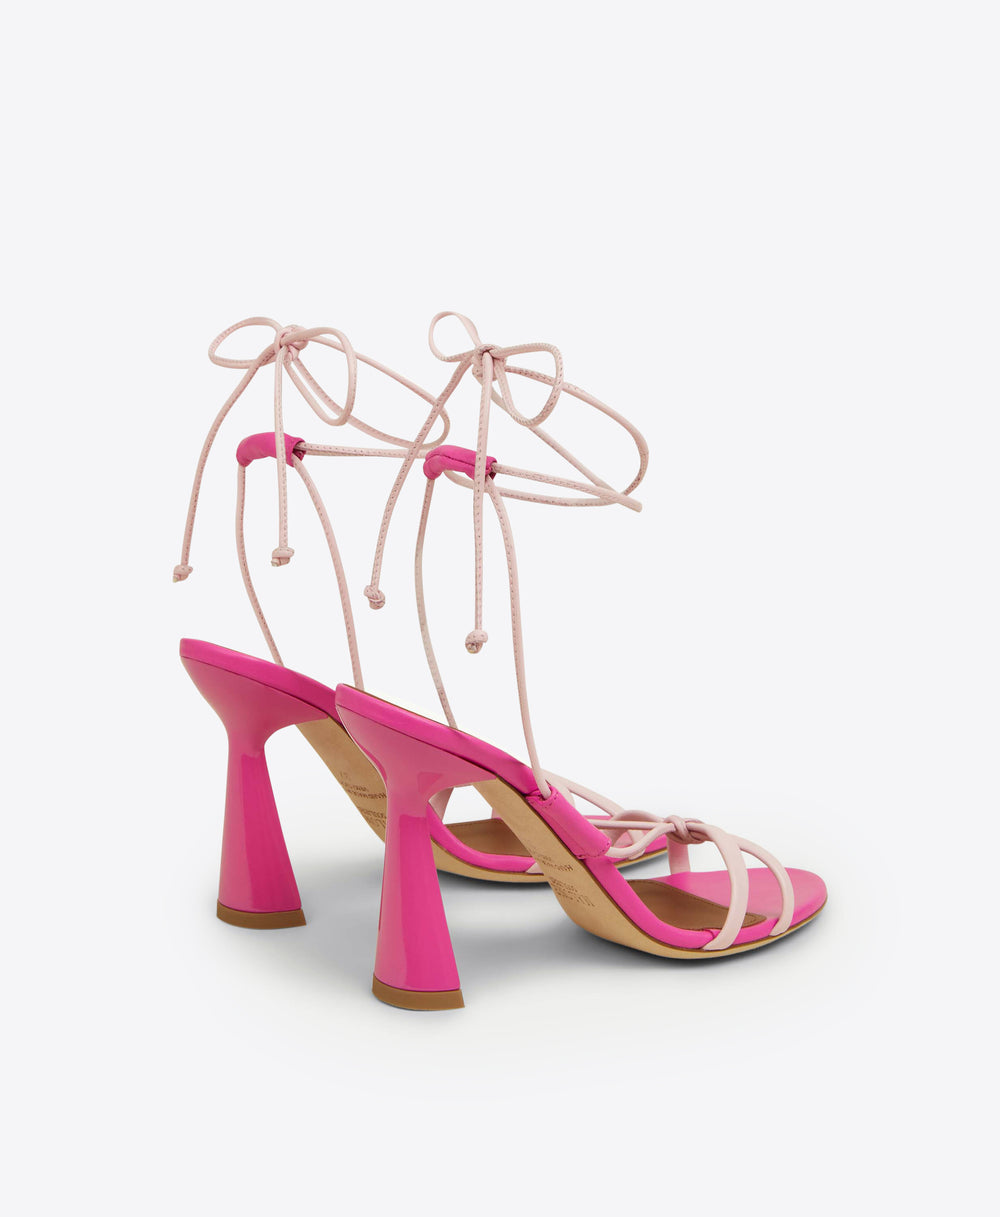 Malone Souliers Kenny 95mm Pink Leather Heeled Sandals 